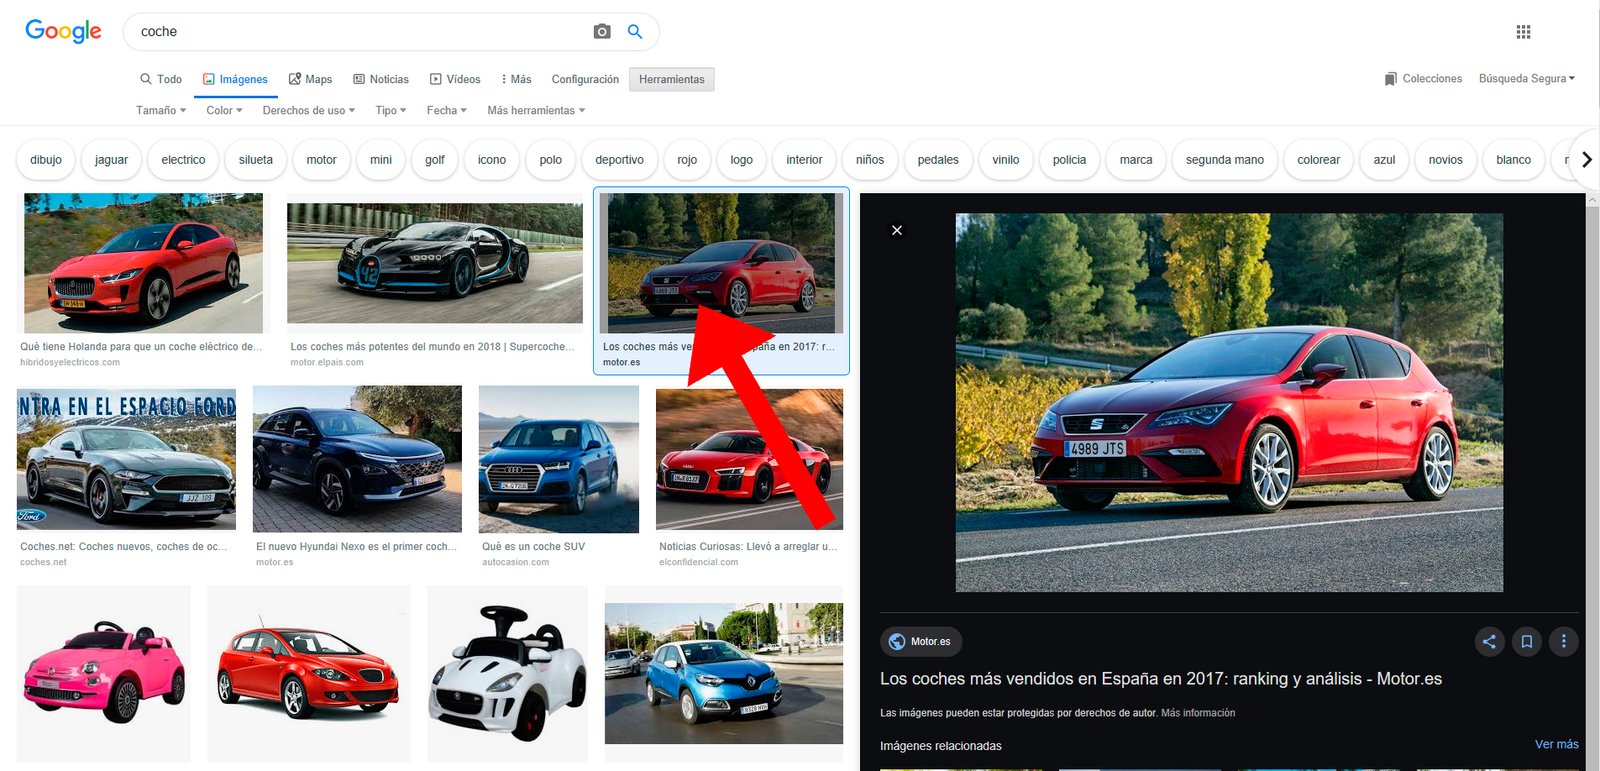 How to search for an image on Google